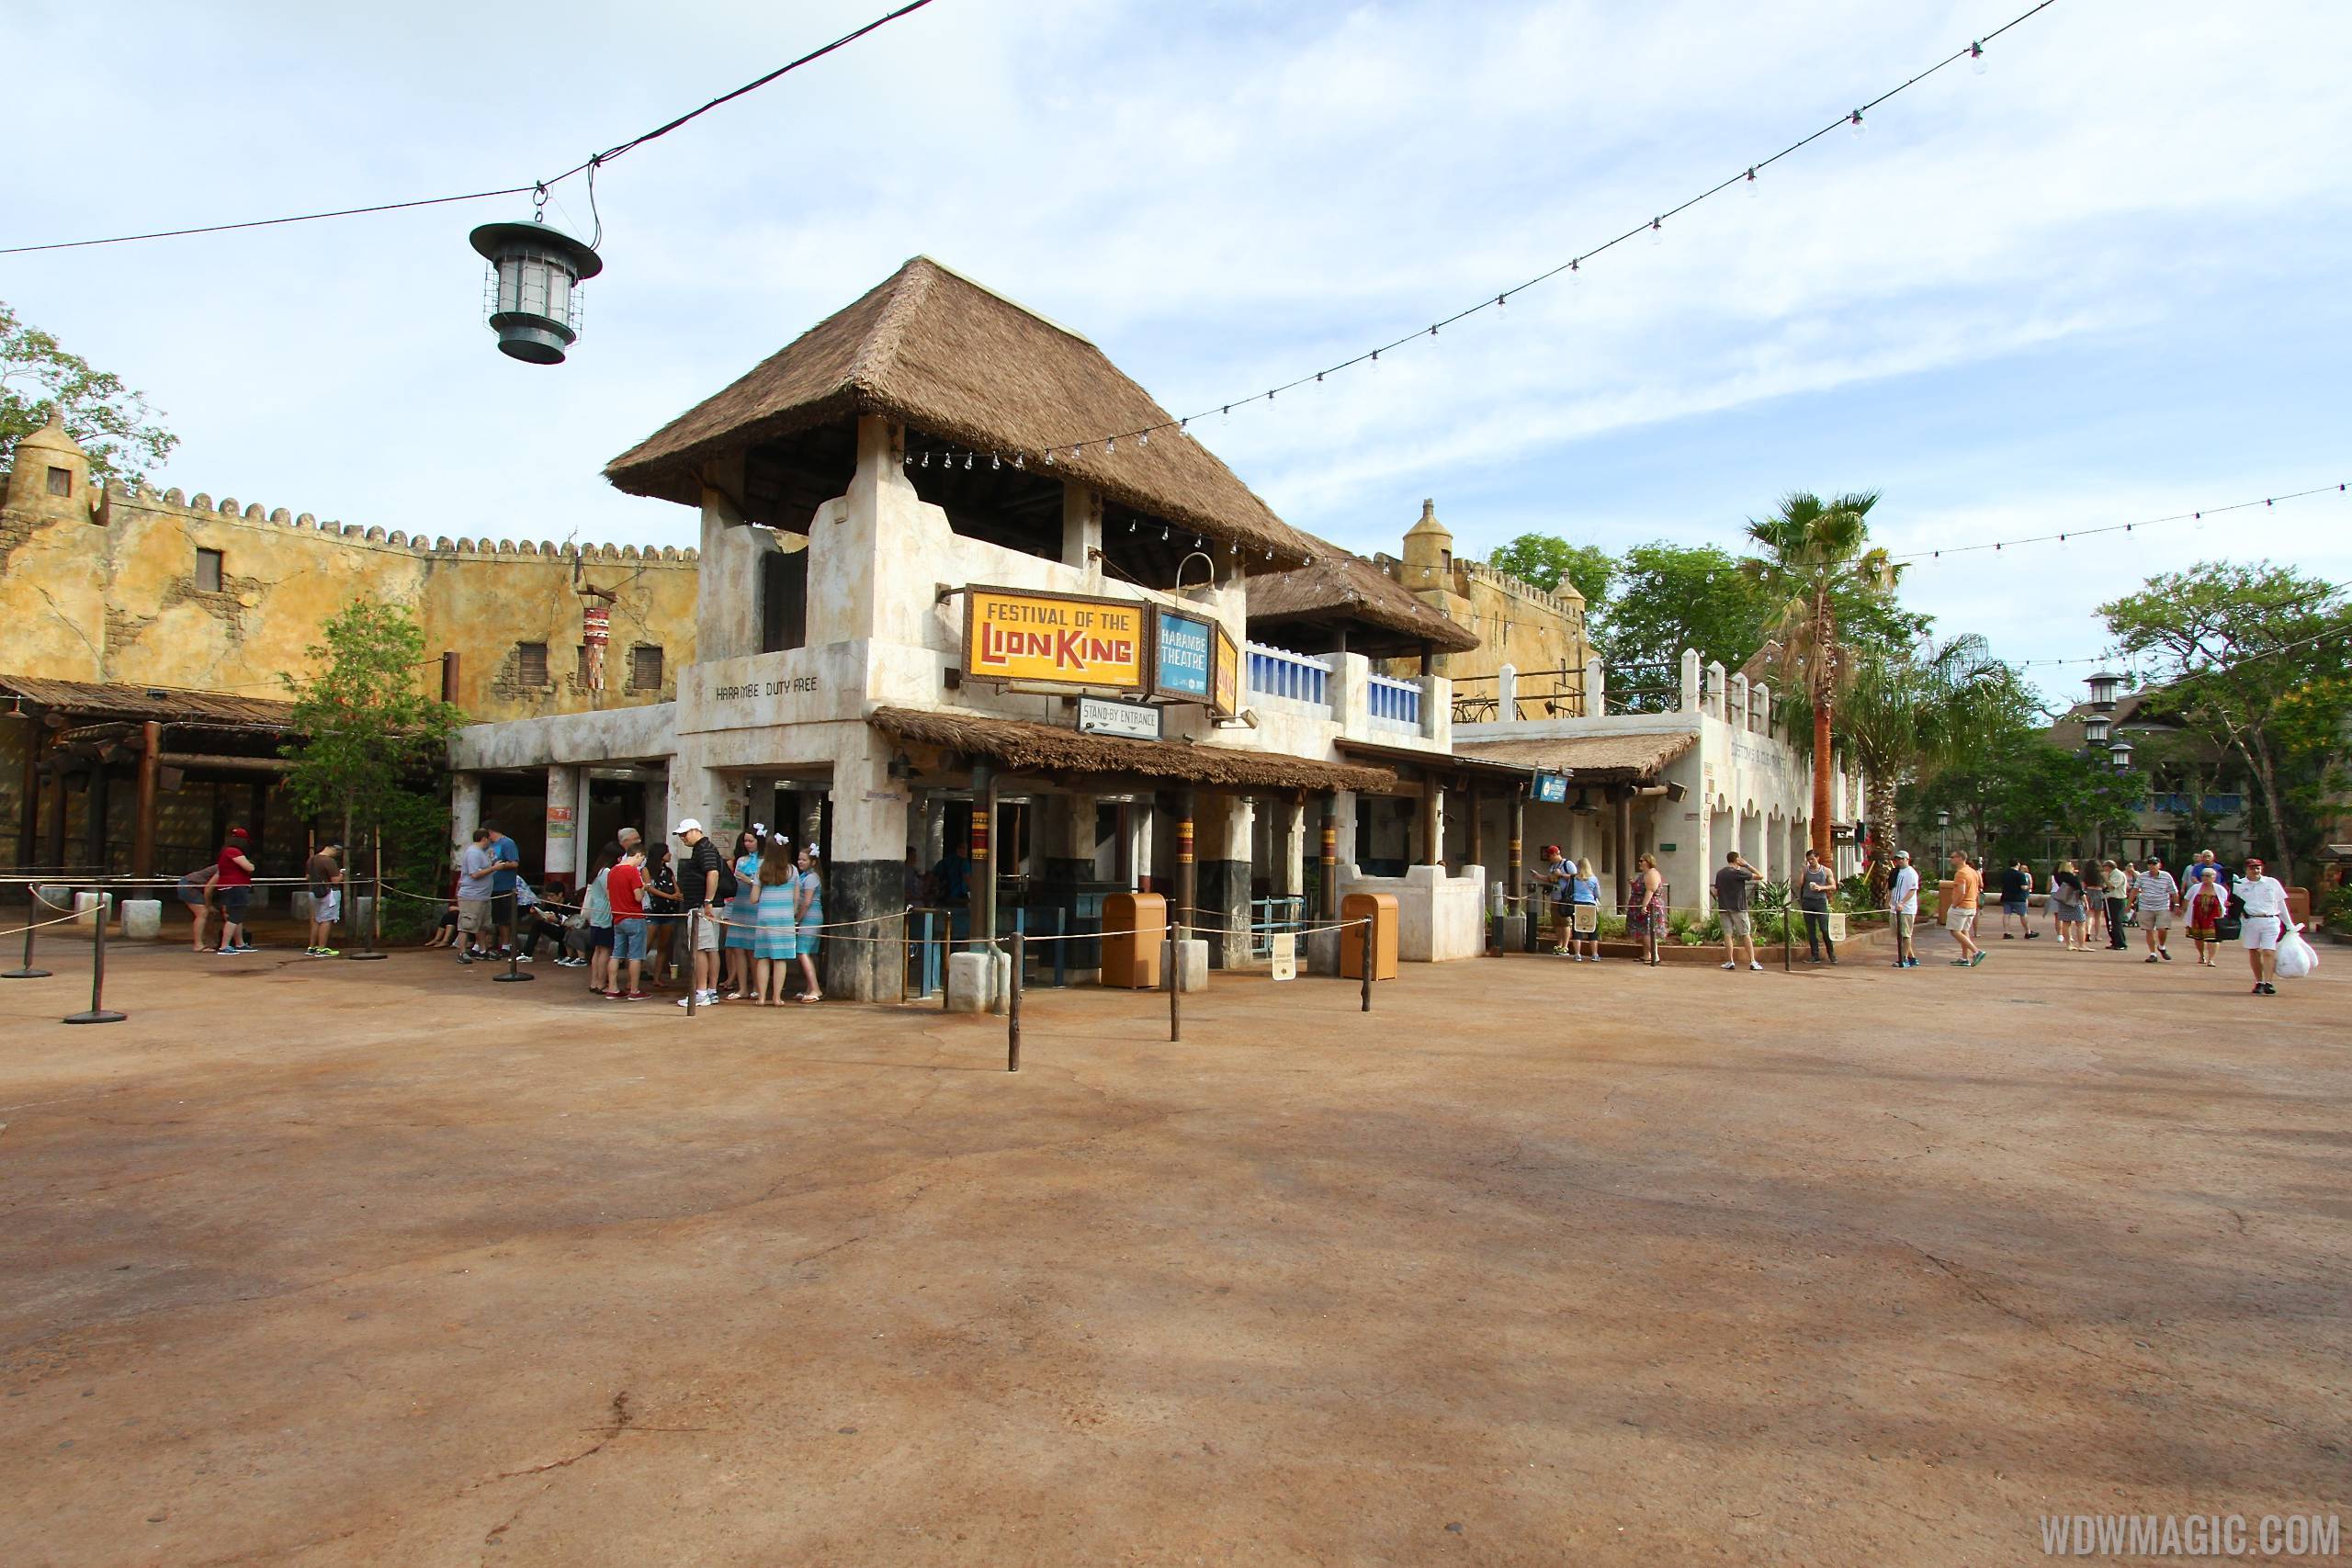 New Harambe Theatre area in Africa - Wide view of the Festival of the Lion King entrance